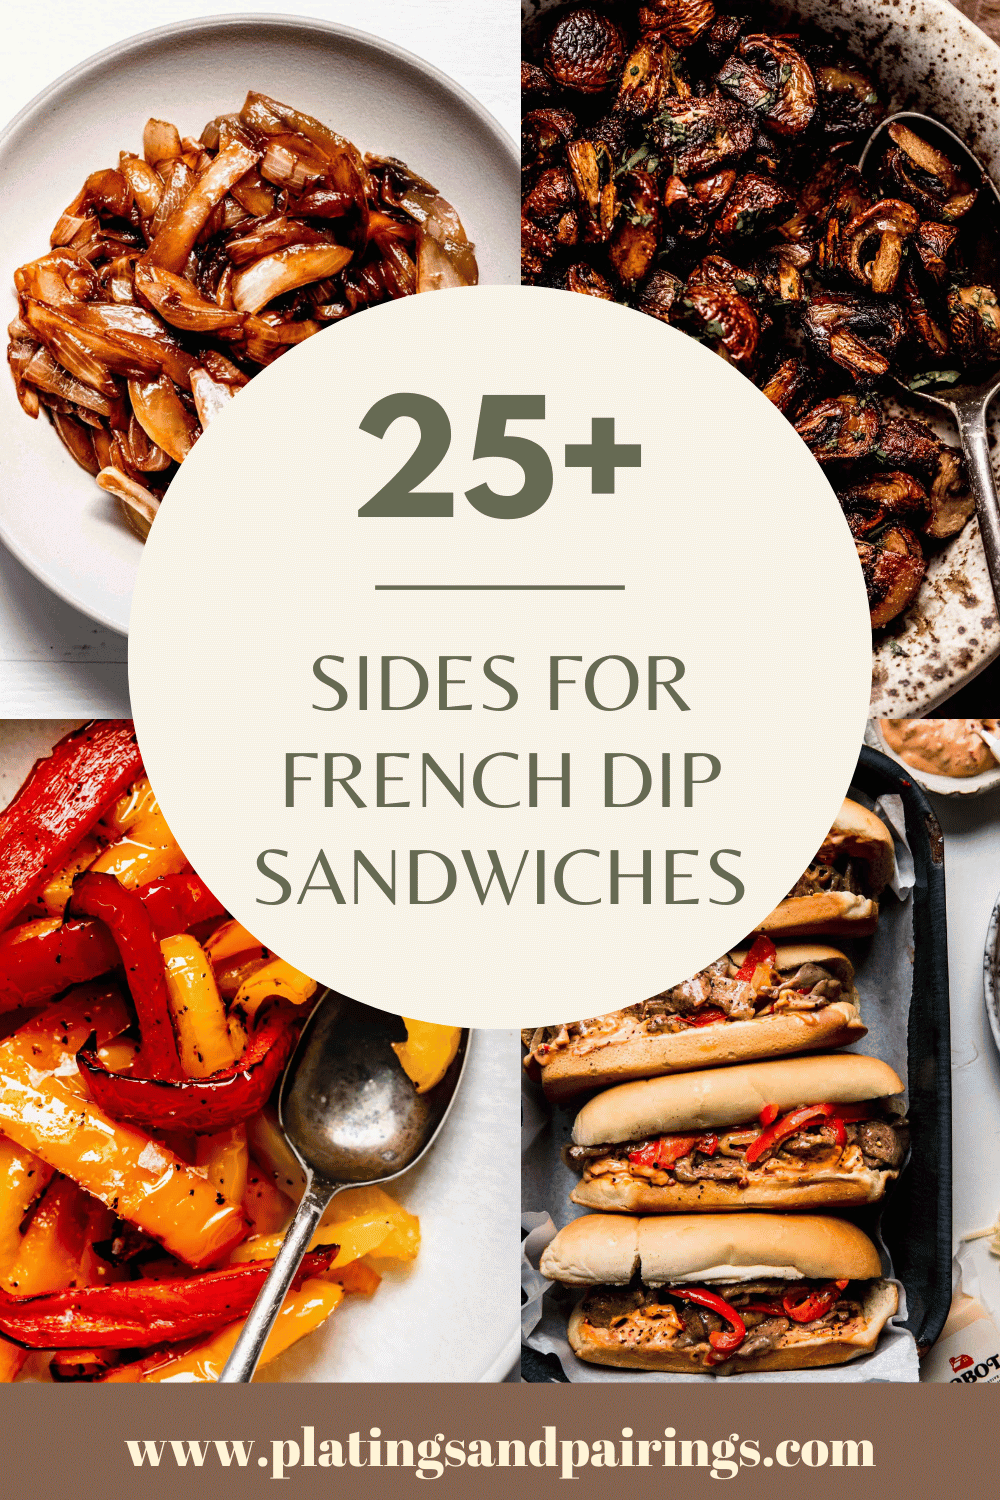 Collage of sides for french dip sandwiches with text overlay.